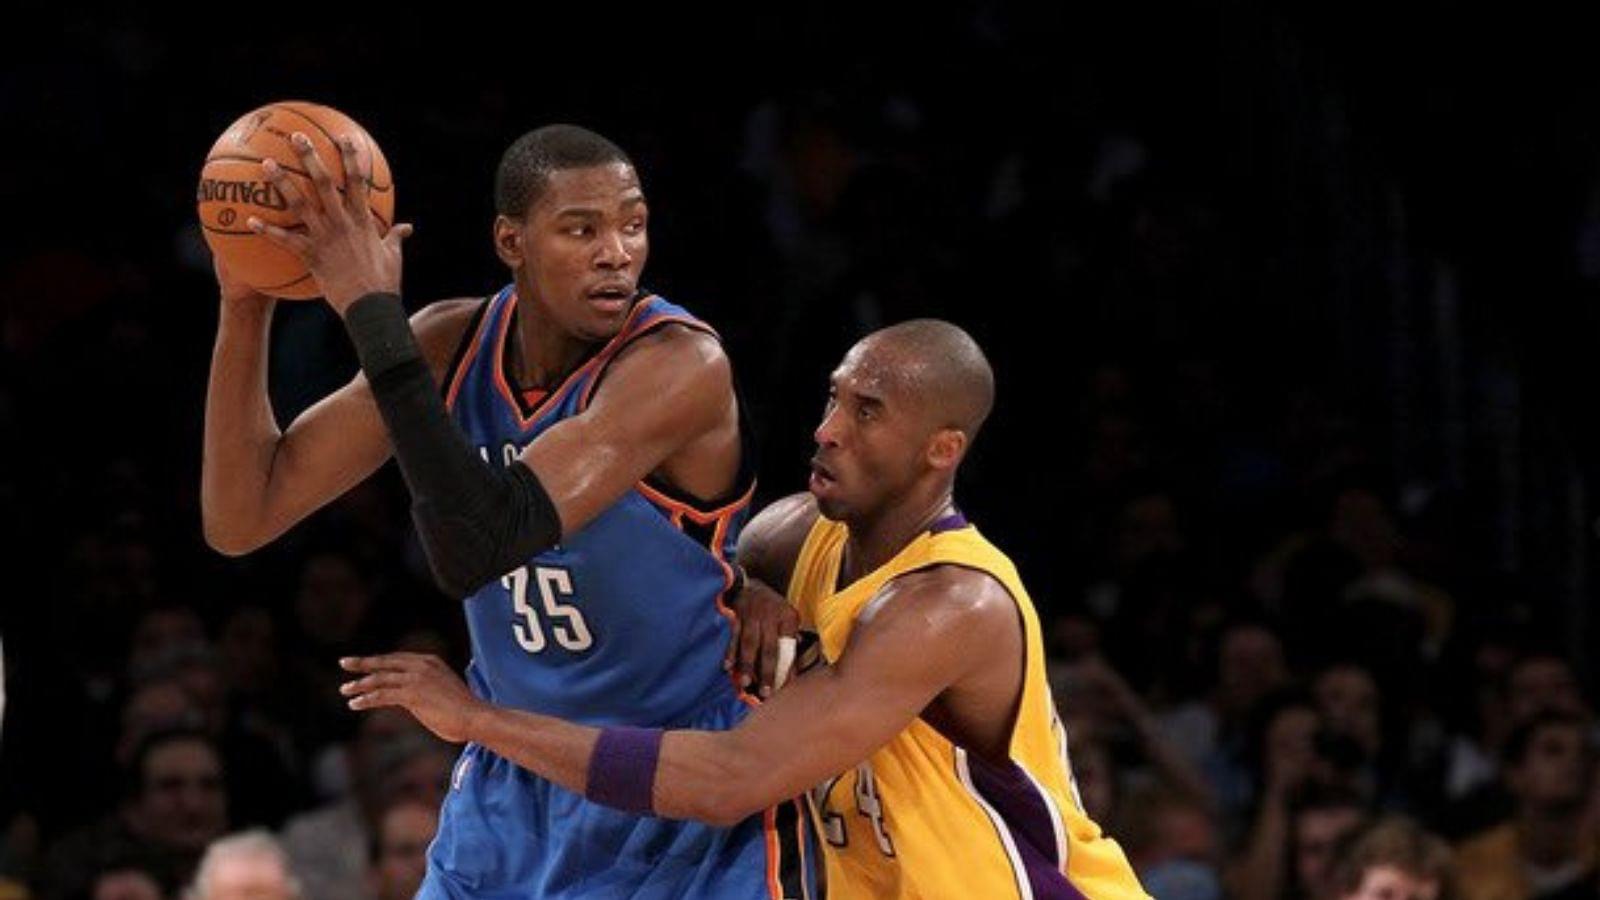 "We can't guard Kevin Durant and the OKC Thunder": Kobe Bryant was honest about the Lakers’ defense following a blowout loss to the Thunder